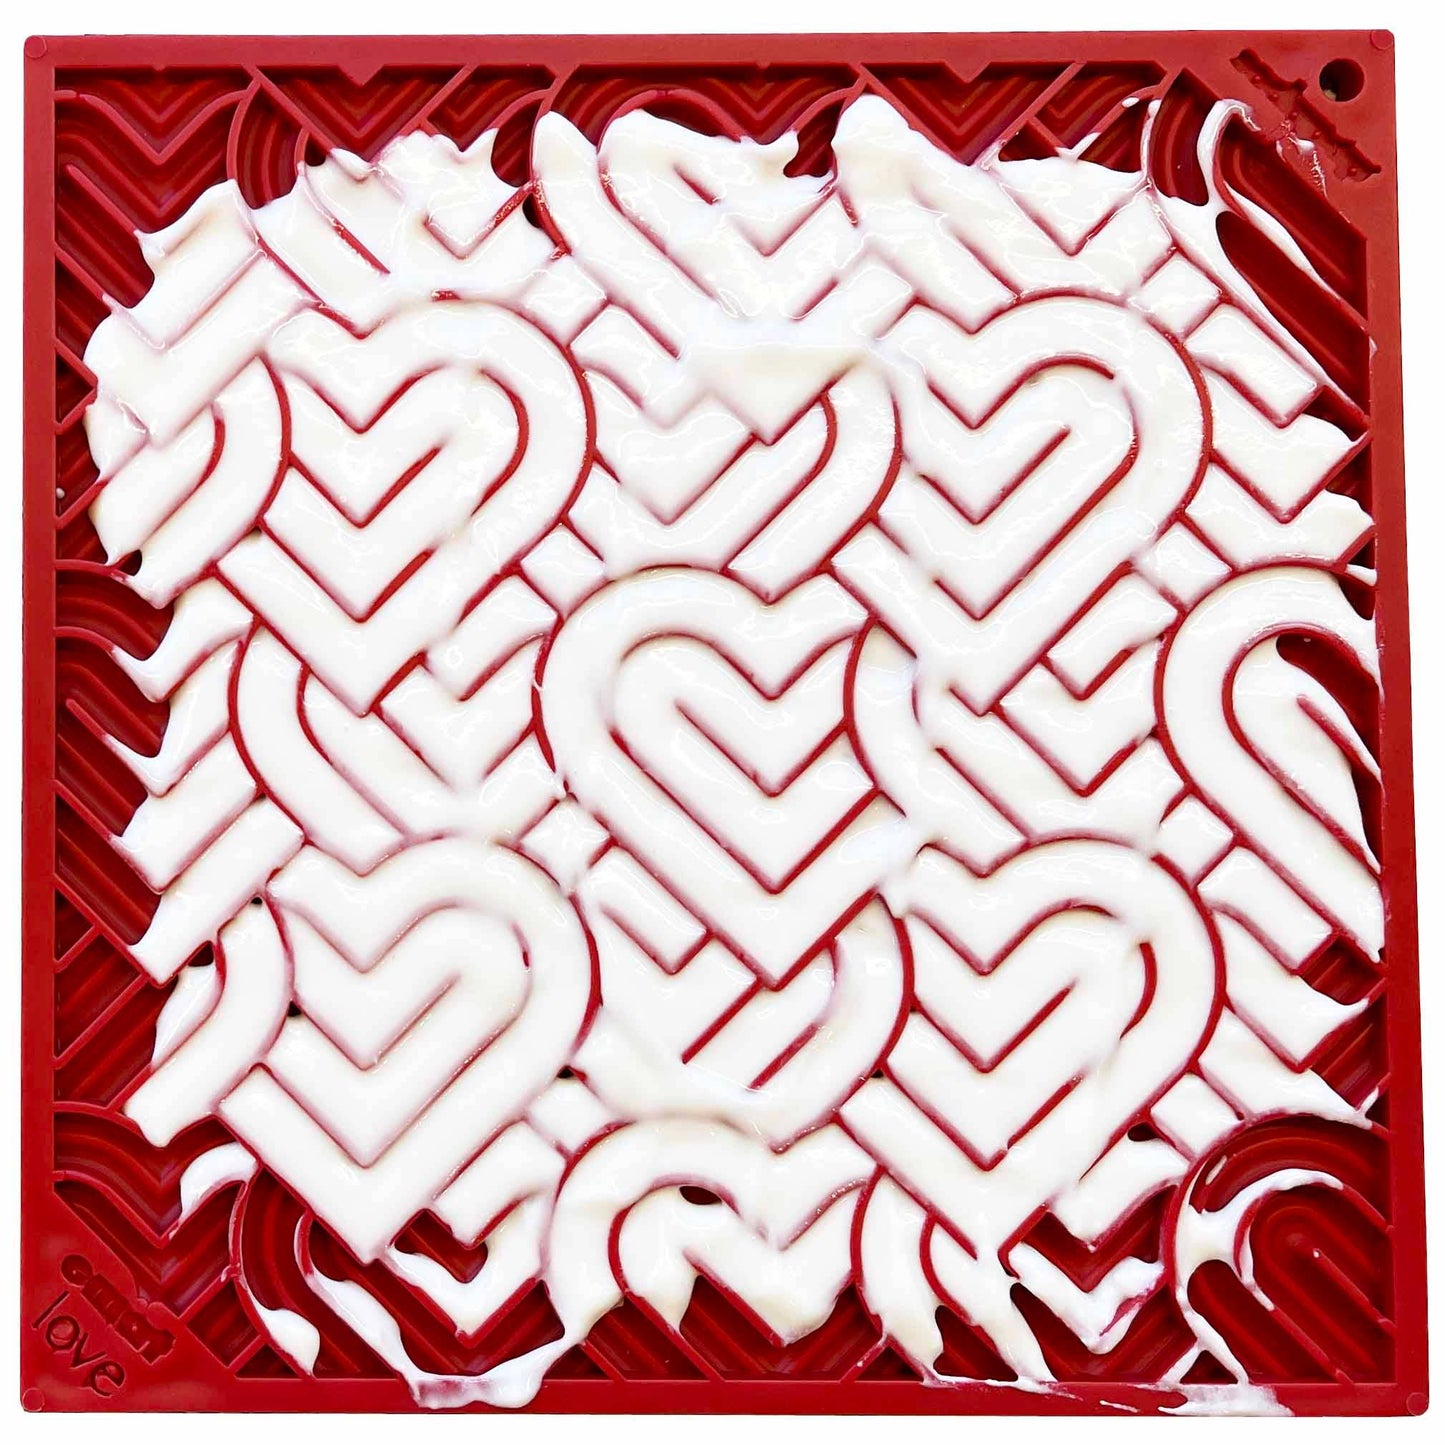 Heart Design "Love" Emat Enrichment Lick Mat - Red - Small: Large